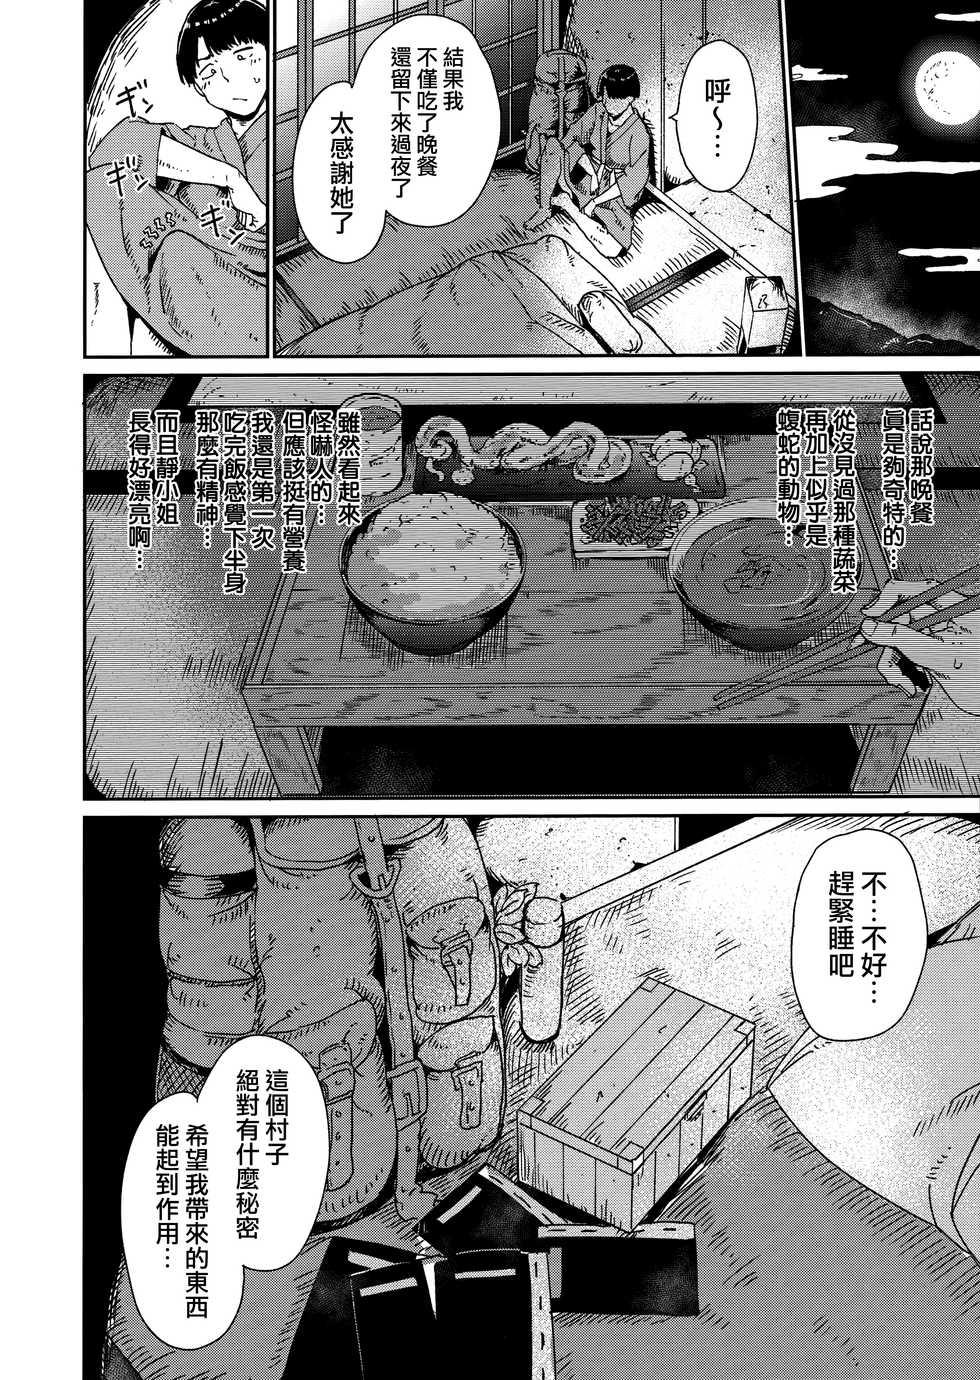 [Alp] Melty Limit Ch. 1-10 [Chinese] [無邪気漢化組] - Page 18